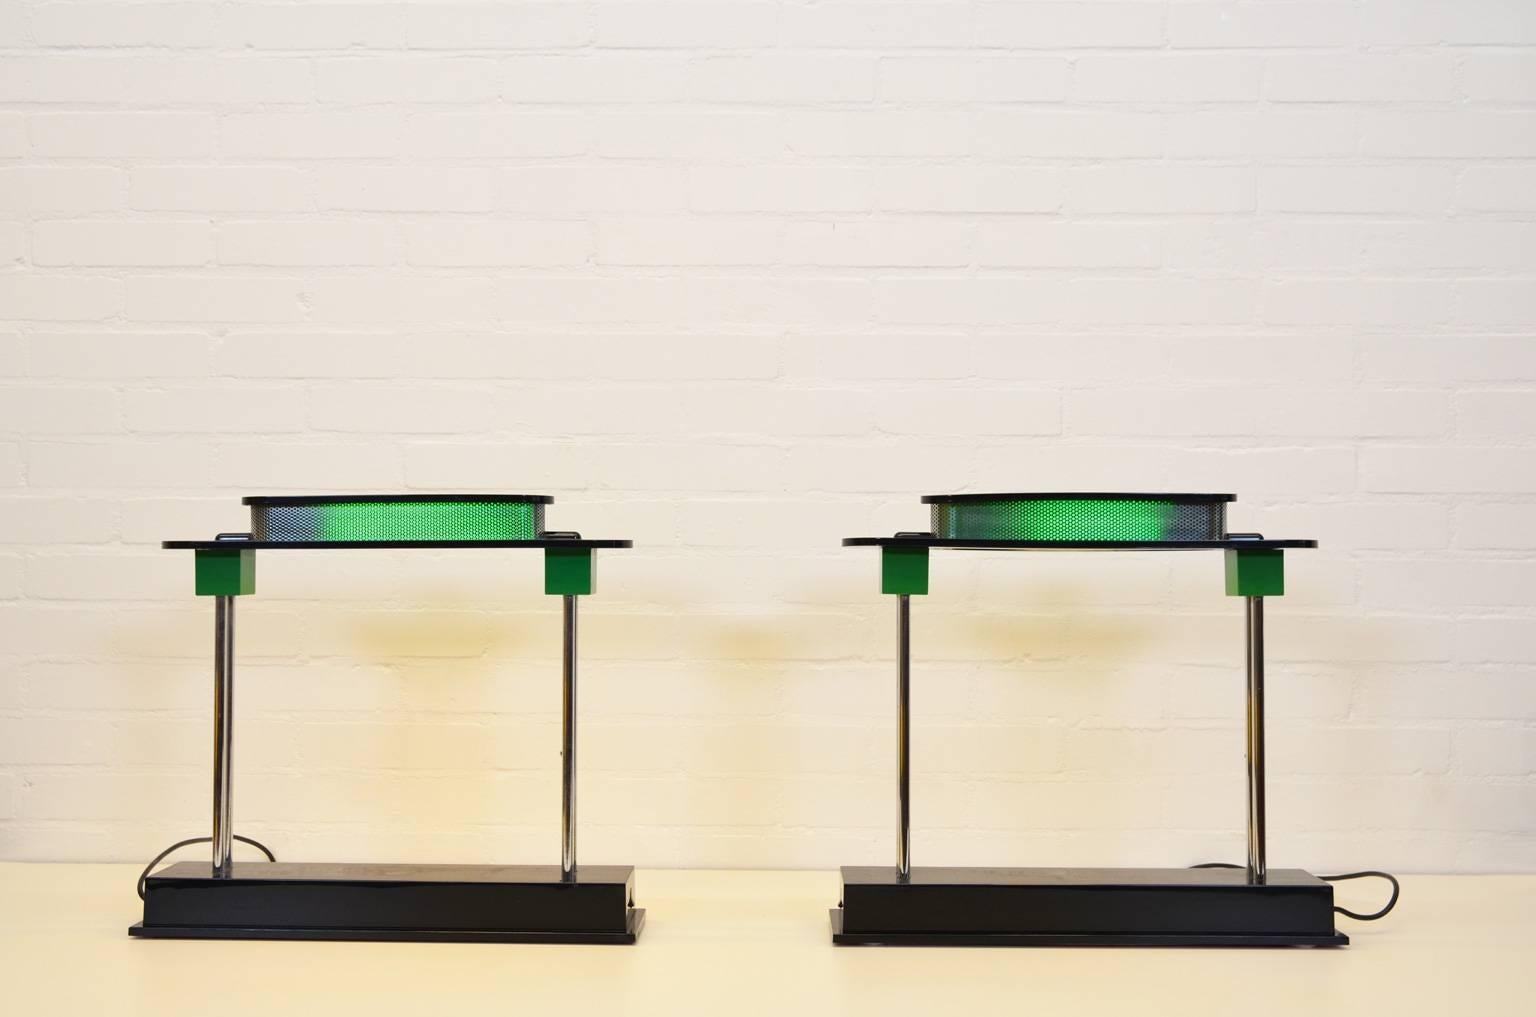 Architecturally designed lamp with classical as well as a modern elements by Ettore Sottsass, one of the founders of the Memphis Milano Group. The lamp is now re-issued, this set is from the original production period from the 1980s. Both lamps are